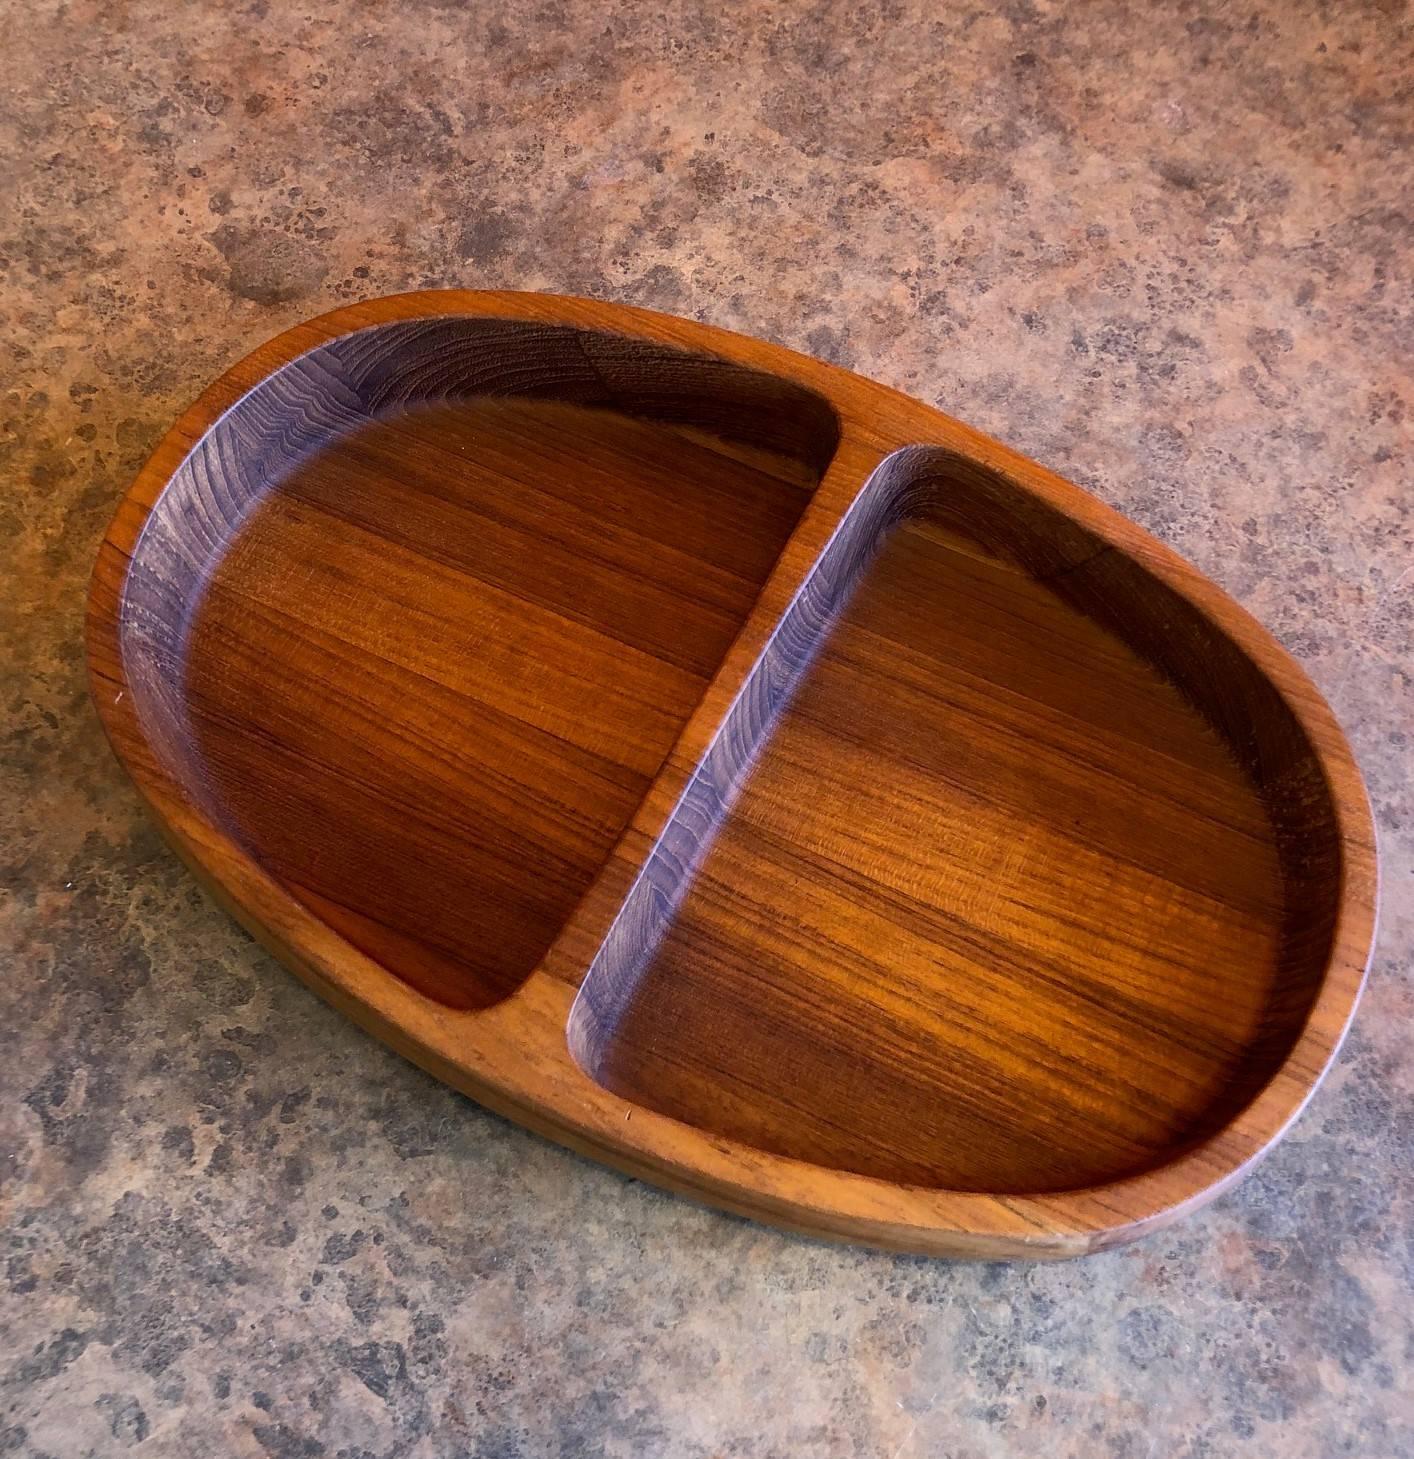 Excellent staved teak double bowl by Jens Quistgaard for Dansk, circa 1970s. The bowl is quite functional and in excellent condition.